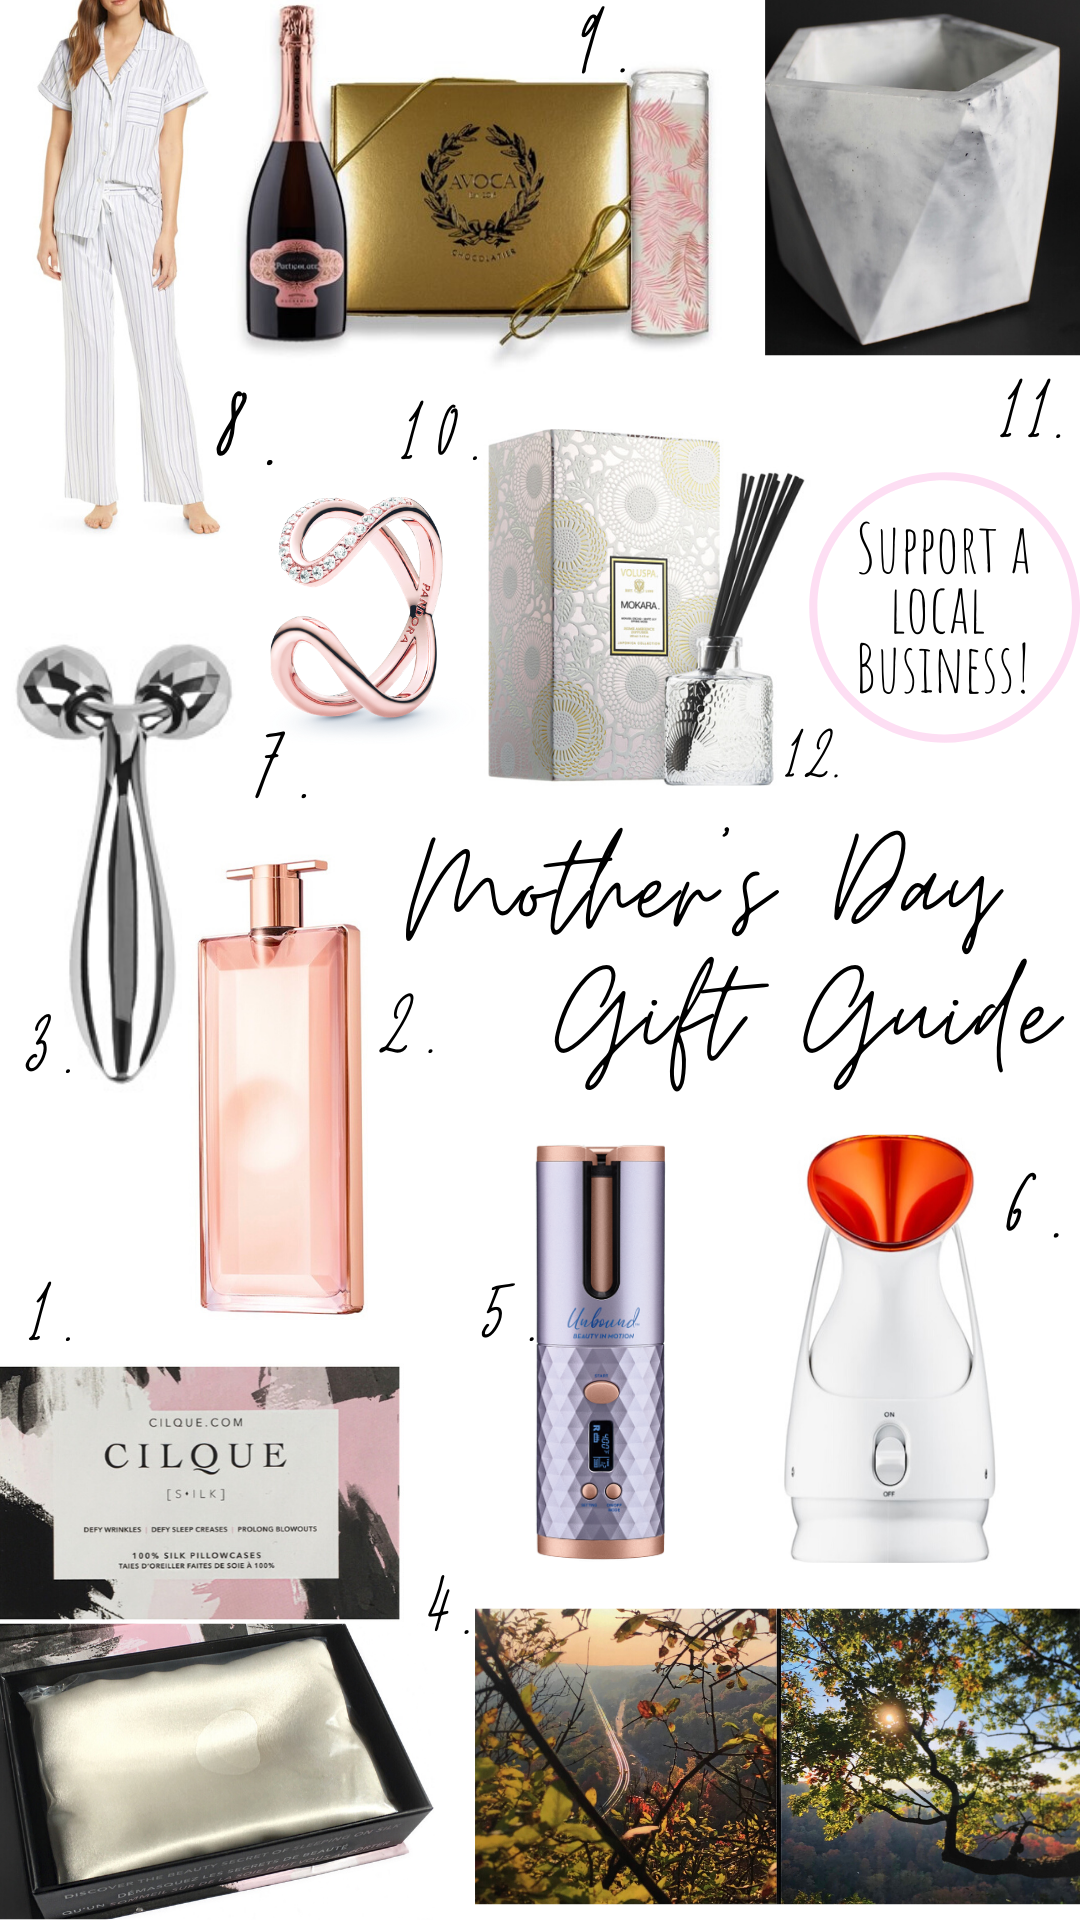 10 Mother's Day Gifts Ideas to Ship